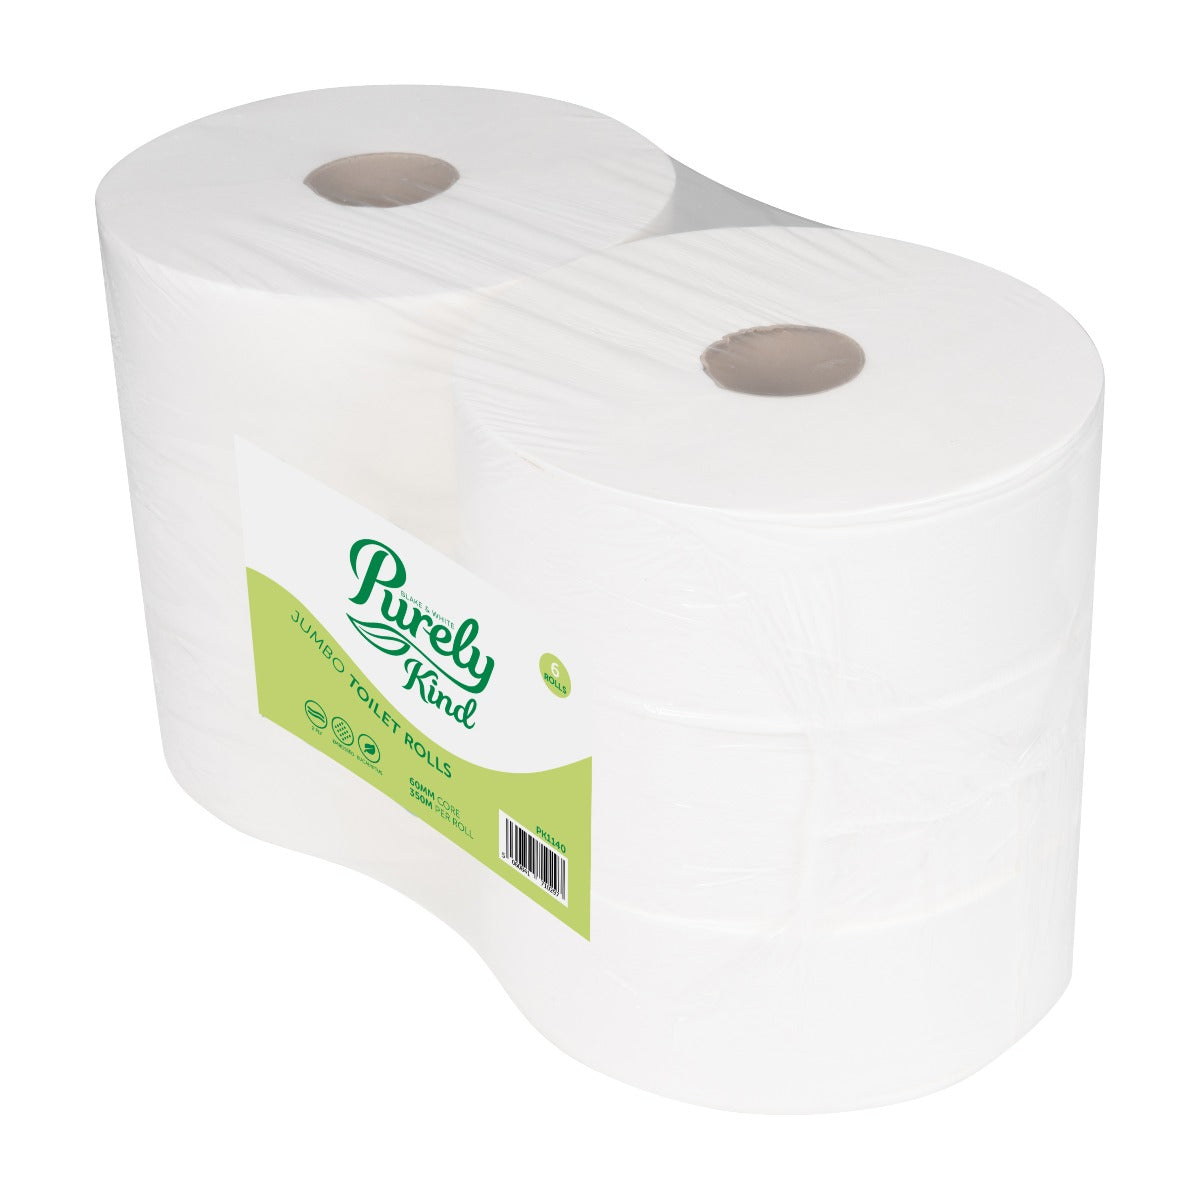 Purely Kind Toilet Roll 2ply Jumbo 350m Pack of 6